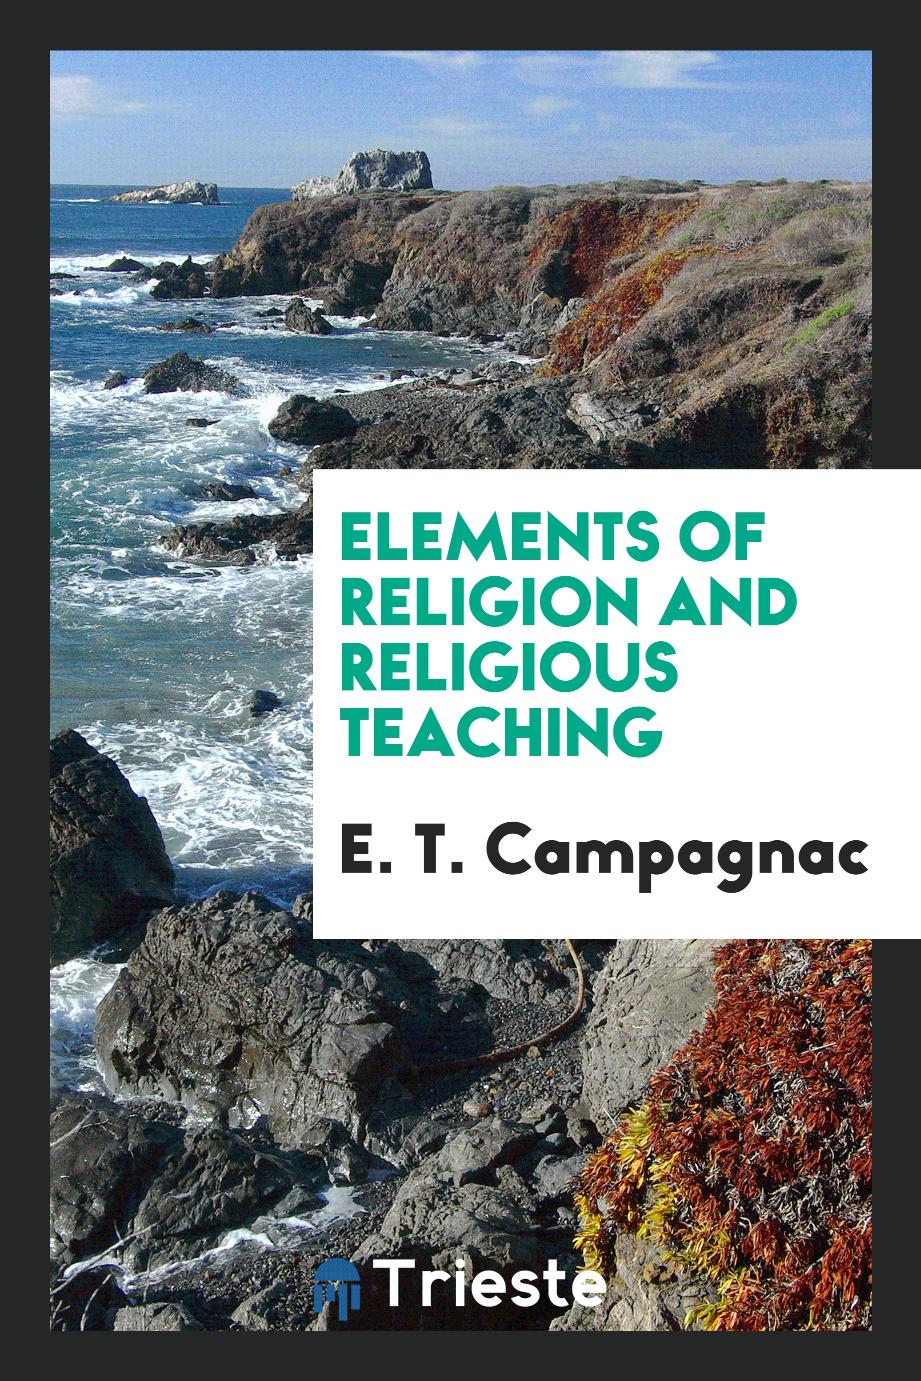 Elements of Religion and Religious Teaching